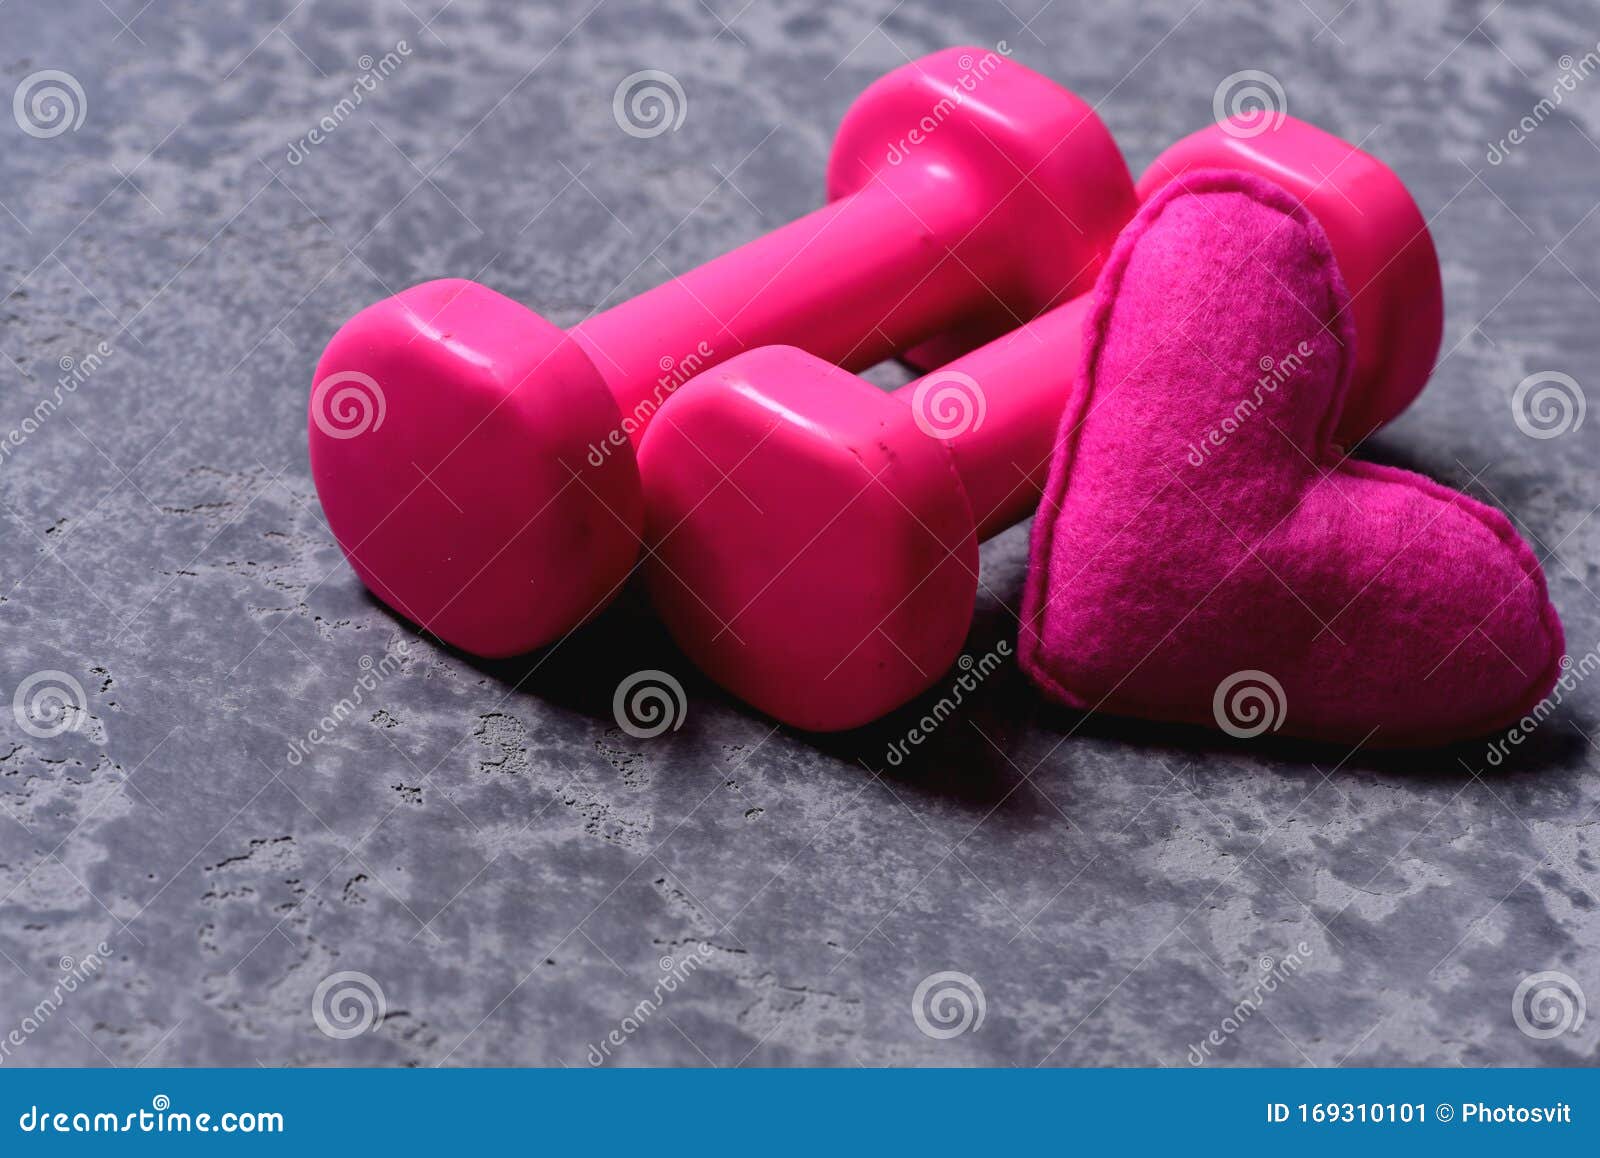 shaping and fitness equipment. dumbbells made of pink plastic